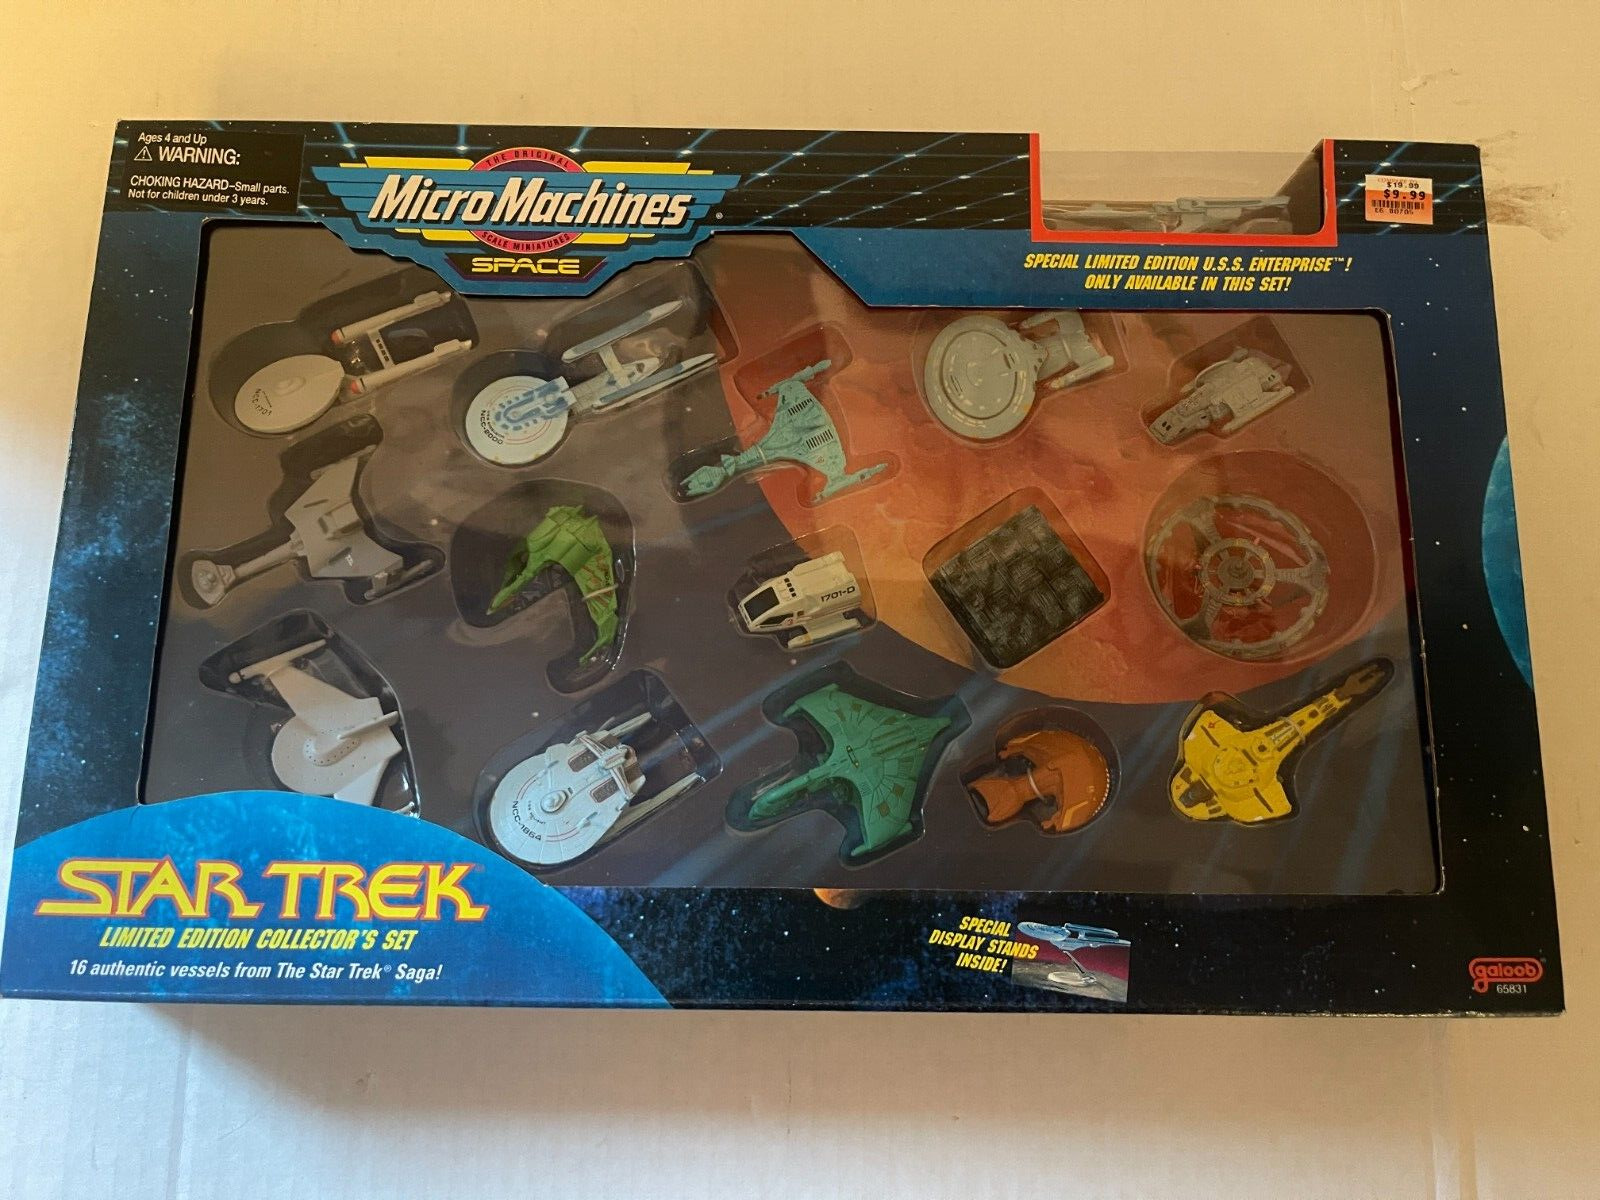 Galoob Micro Machines Star Trek Limited Edition Collector\'s Set (65831) Unopened